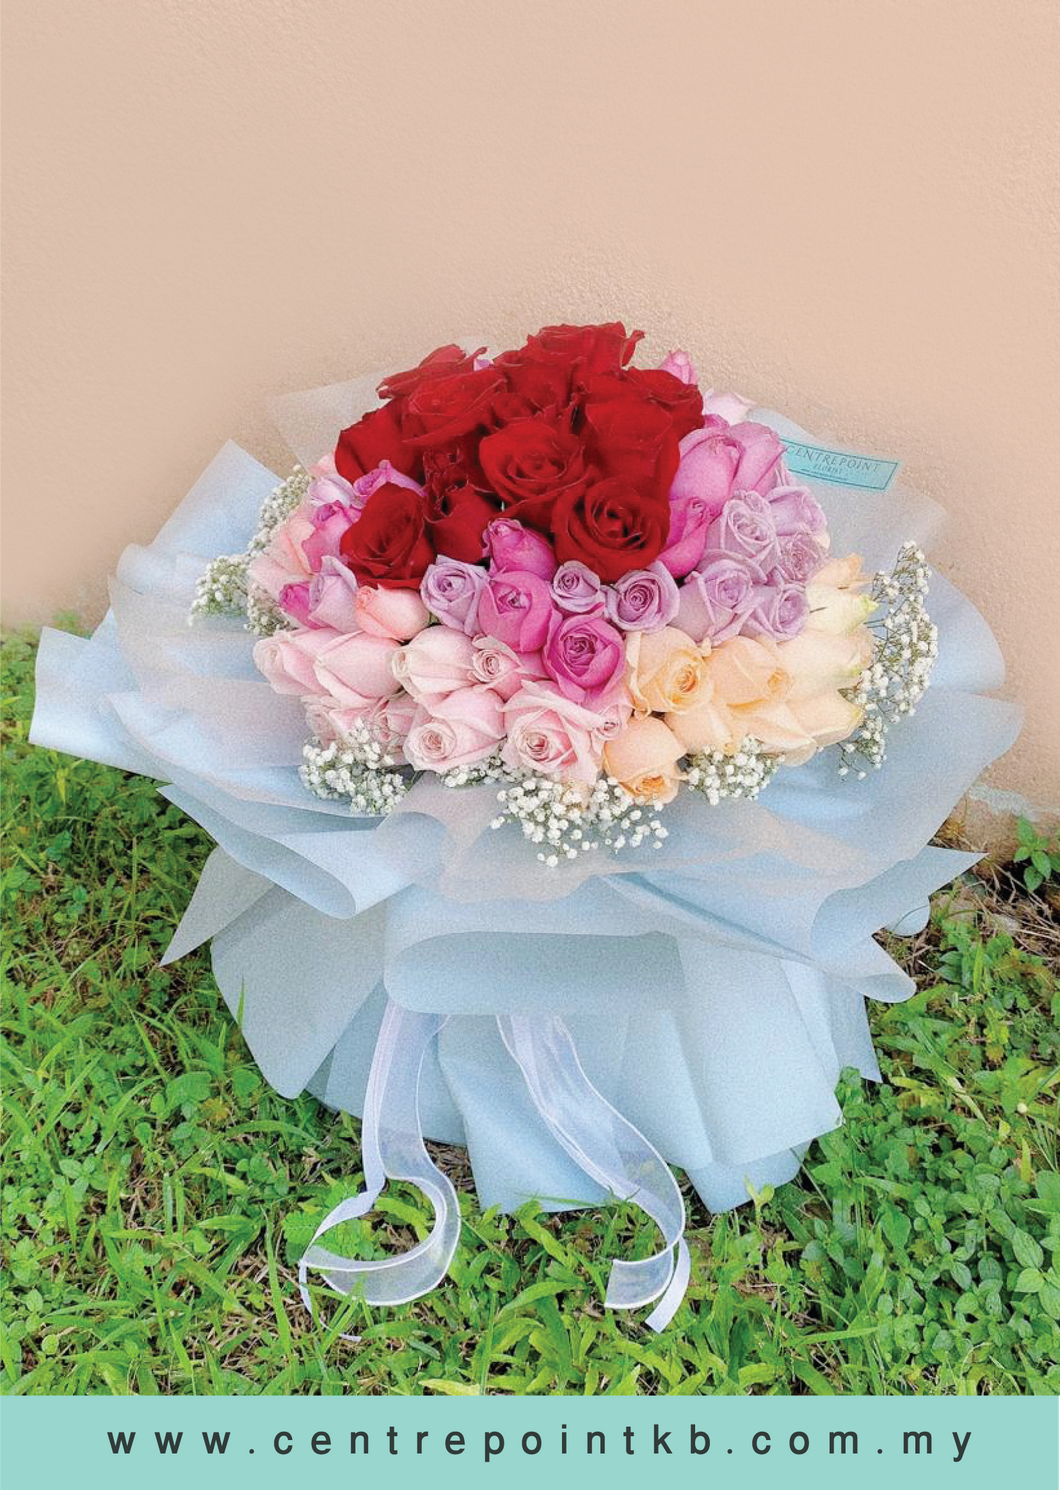 99 Roses (RM 800.00)